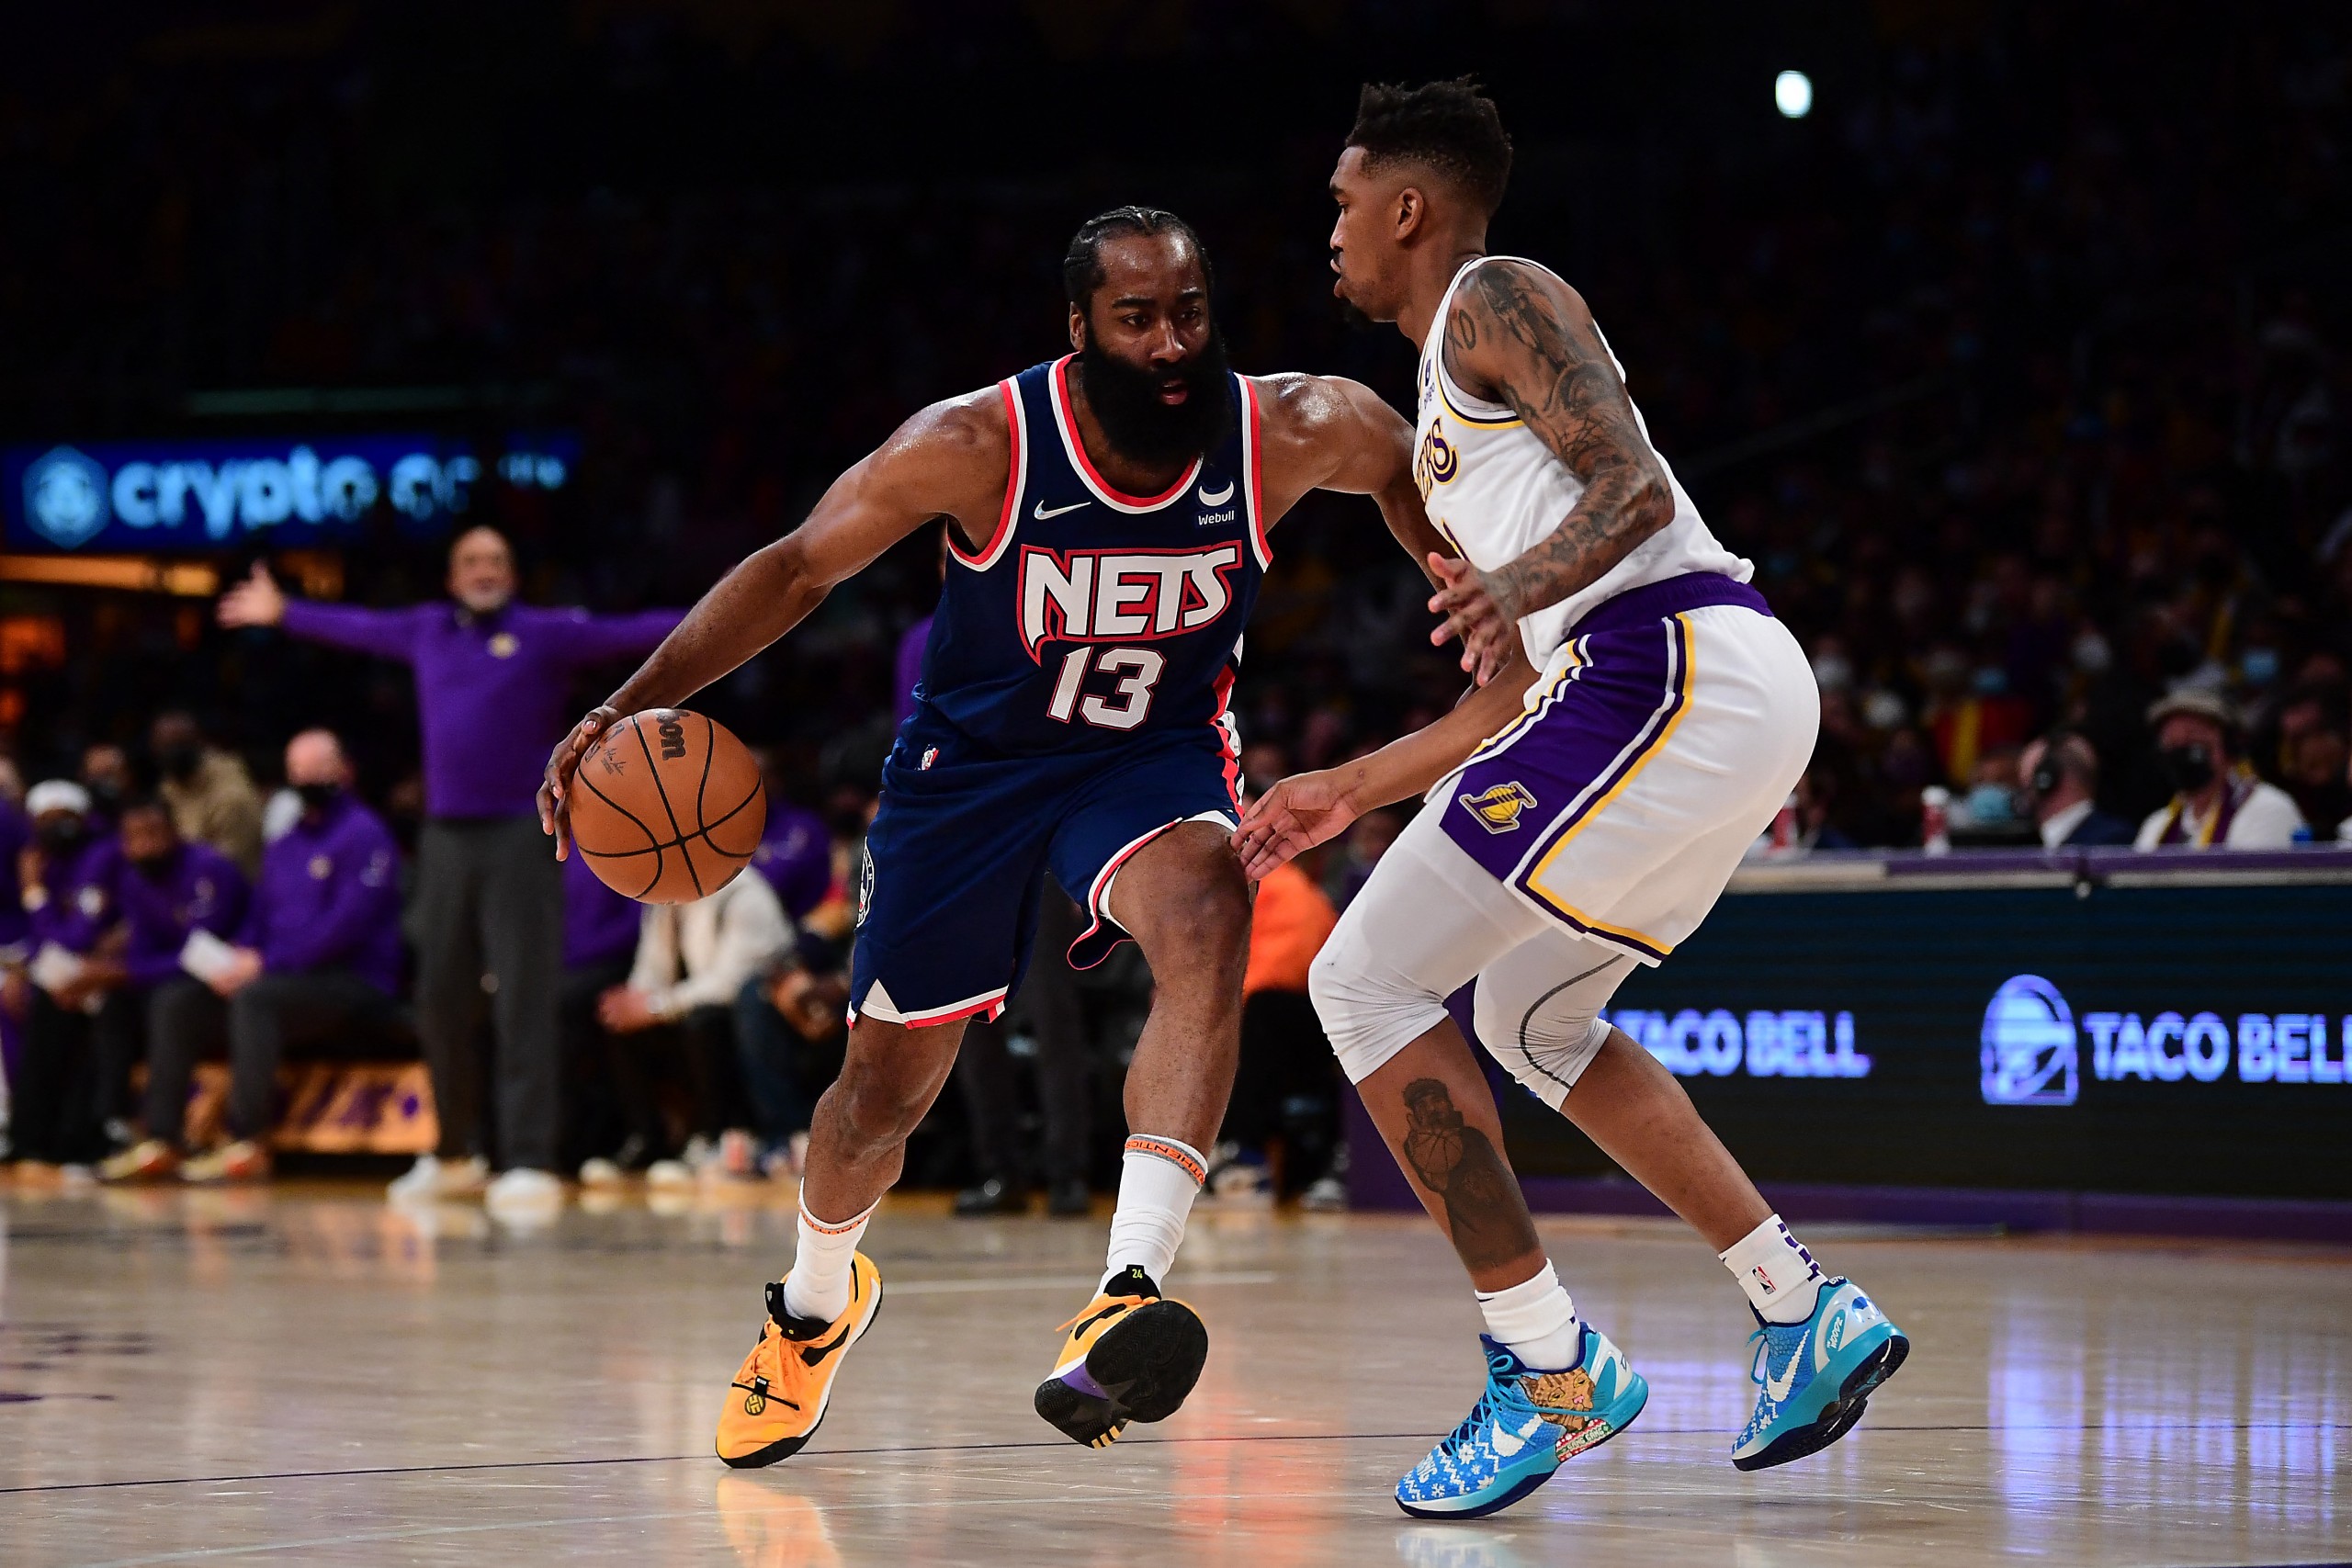 Dec 25, 2021; Los Angeles, California, USA; Brooklyn Nets guard James Harden (13) moves the ball against Los Angeles Lakers guard Malik Monk (11) during the first half at Crypto.com Arena. Mandatory Credit: Gary A. Vasquez-USA TODAY Sports